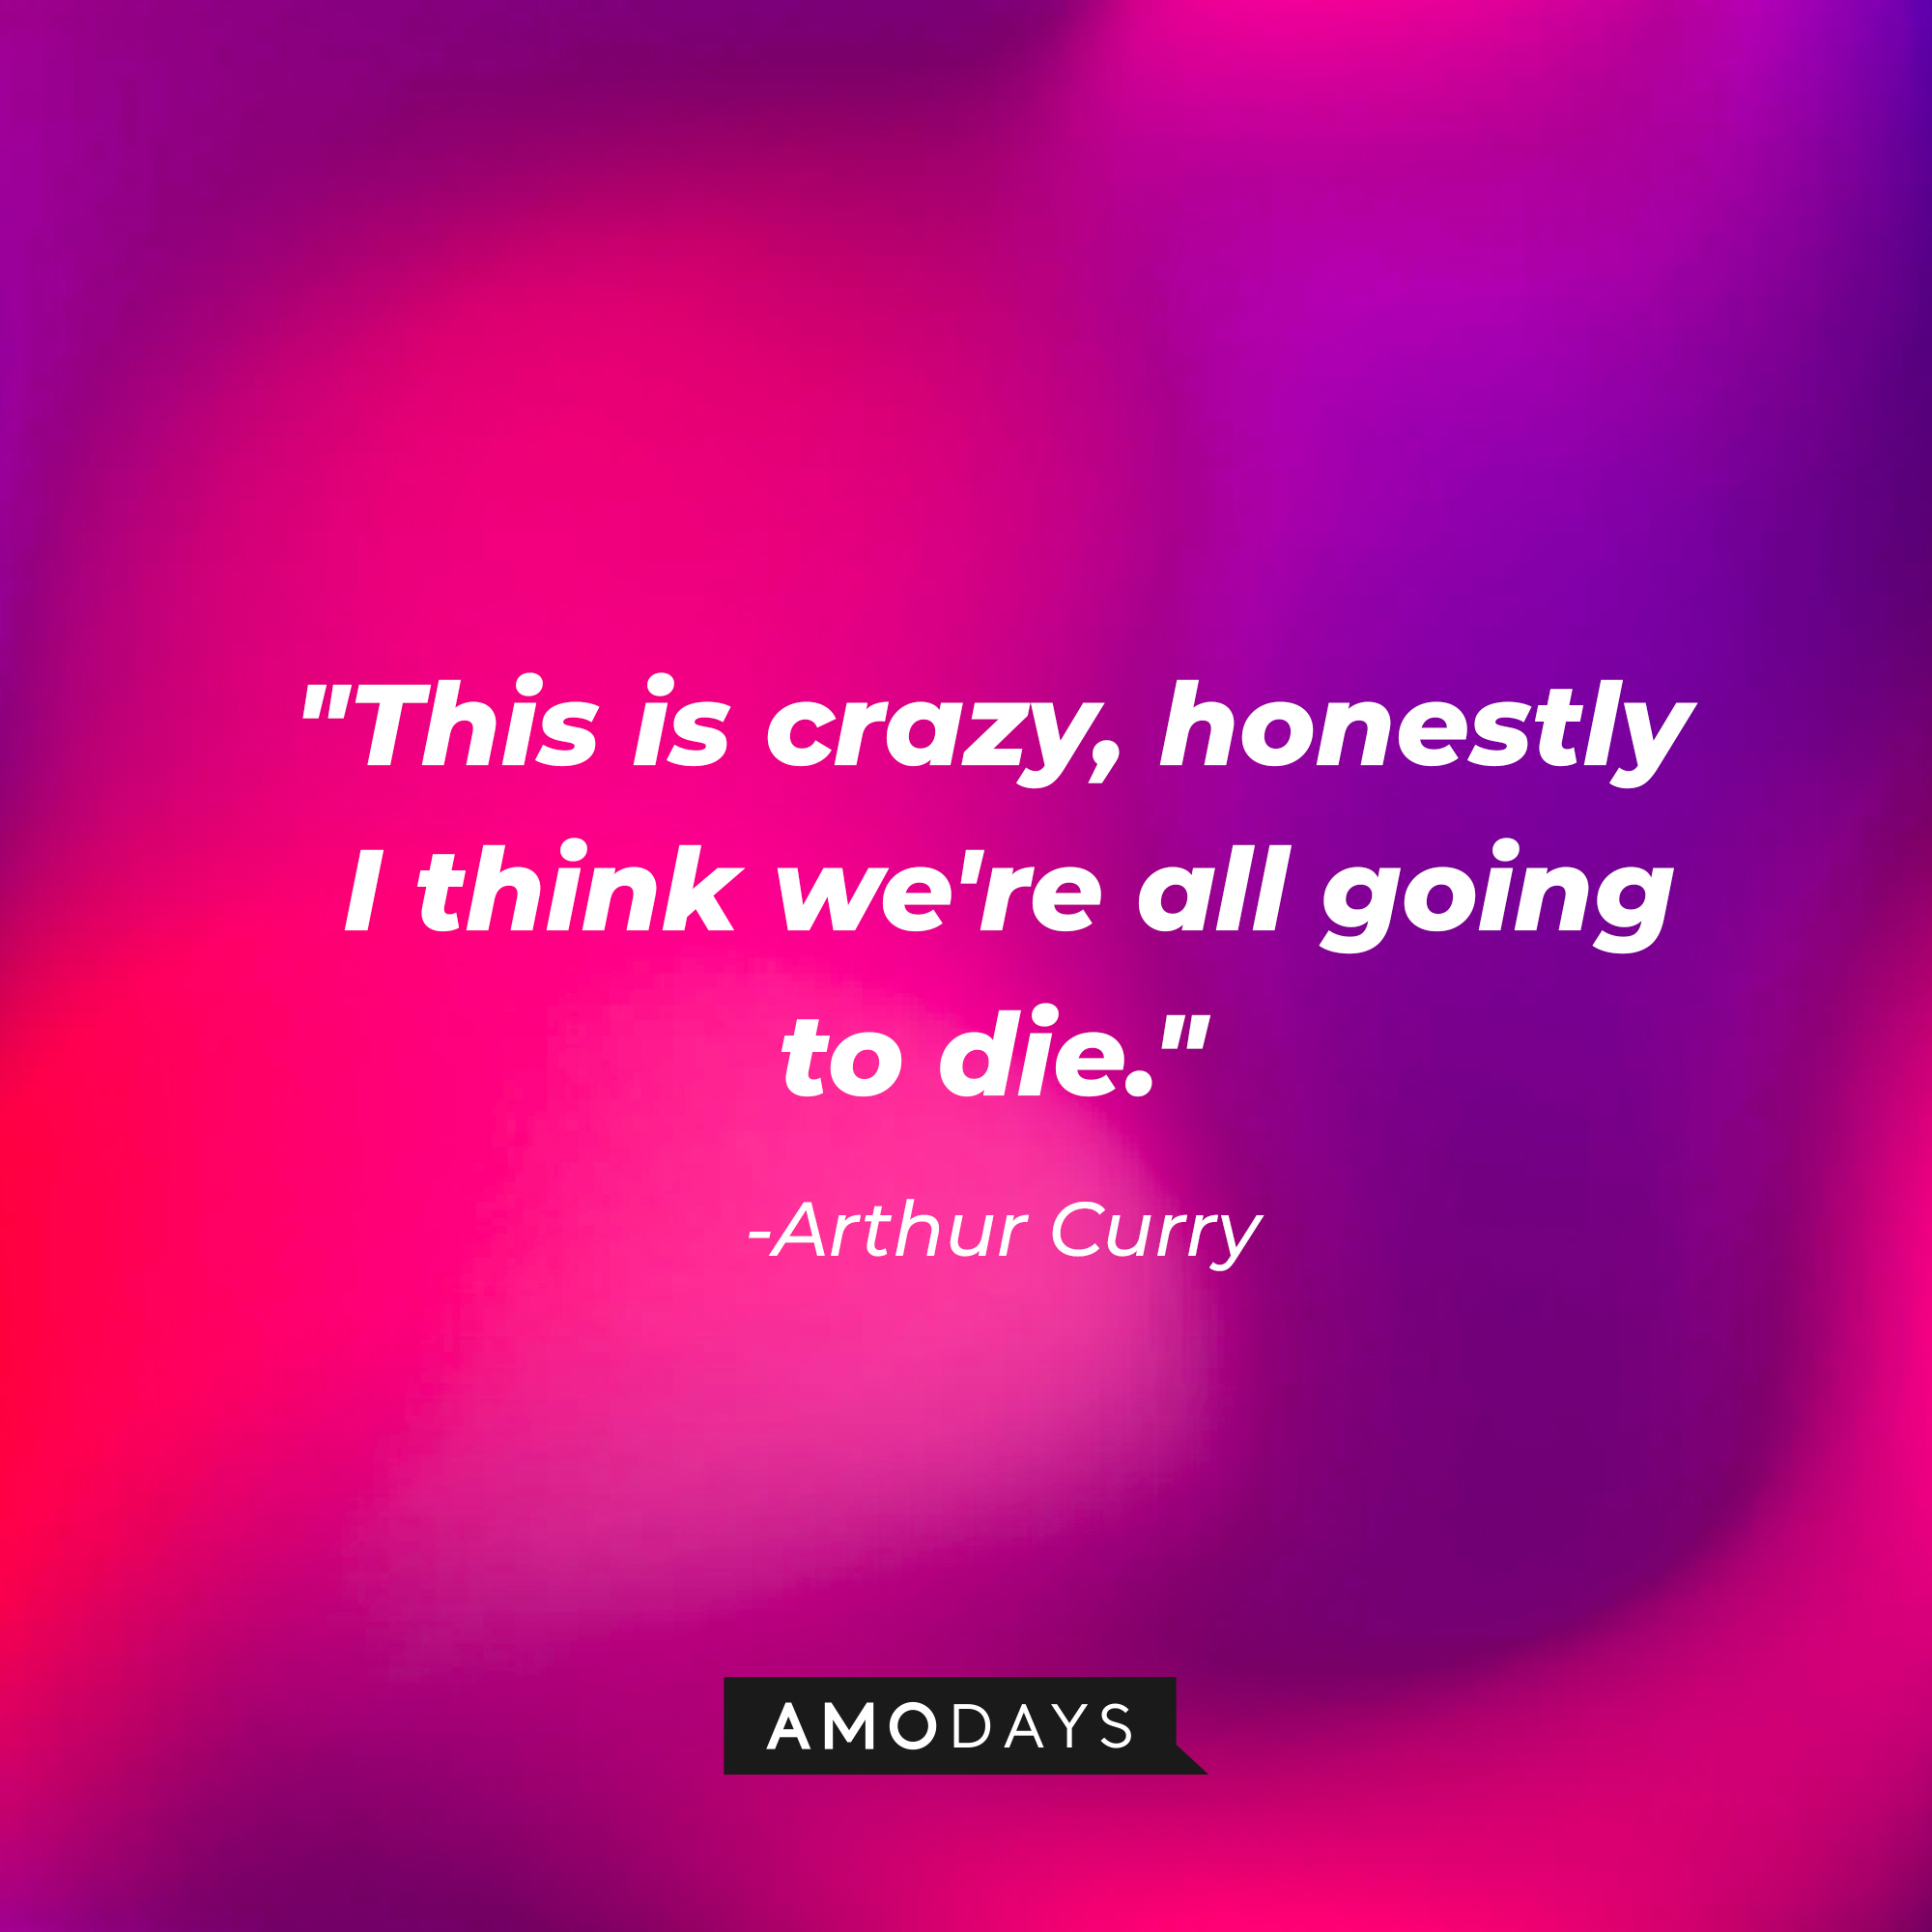 Arthur Curry's quote, "This is crazy, honestly I think we're all going to die." | Source: AmoDays